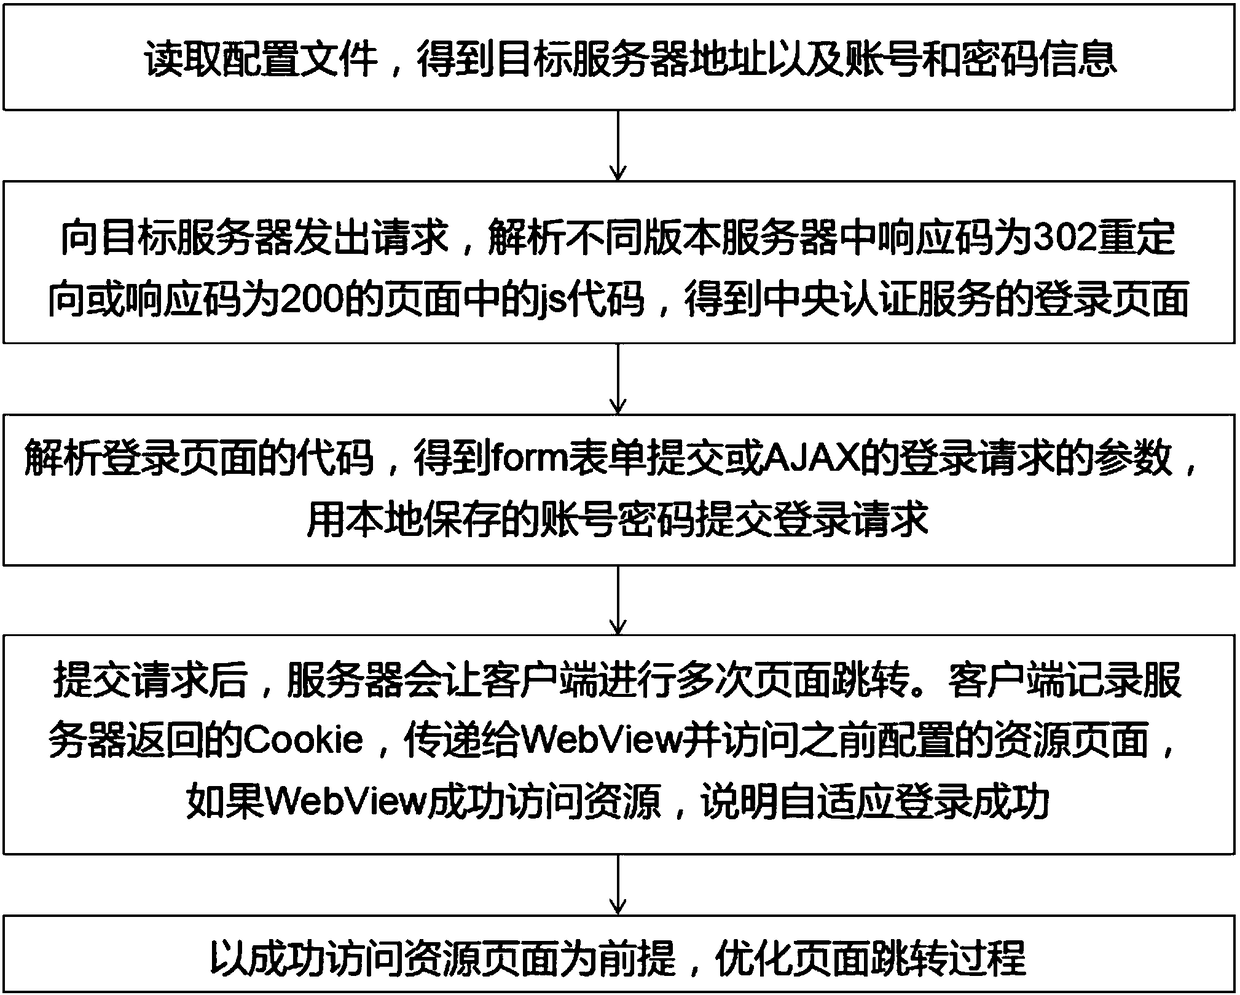 Android equipment webpage data processing system and data processing method of system